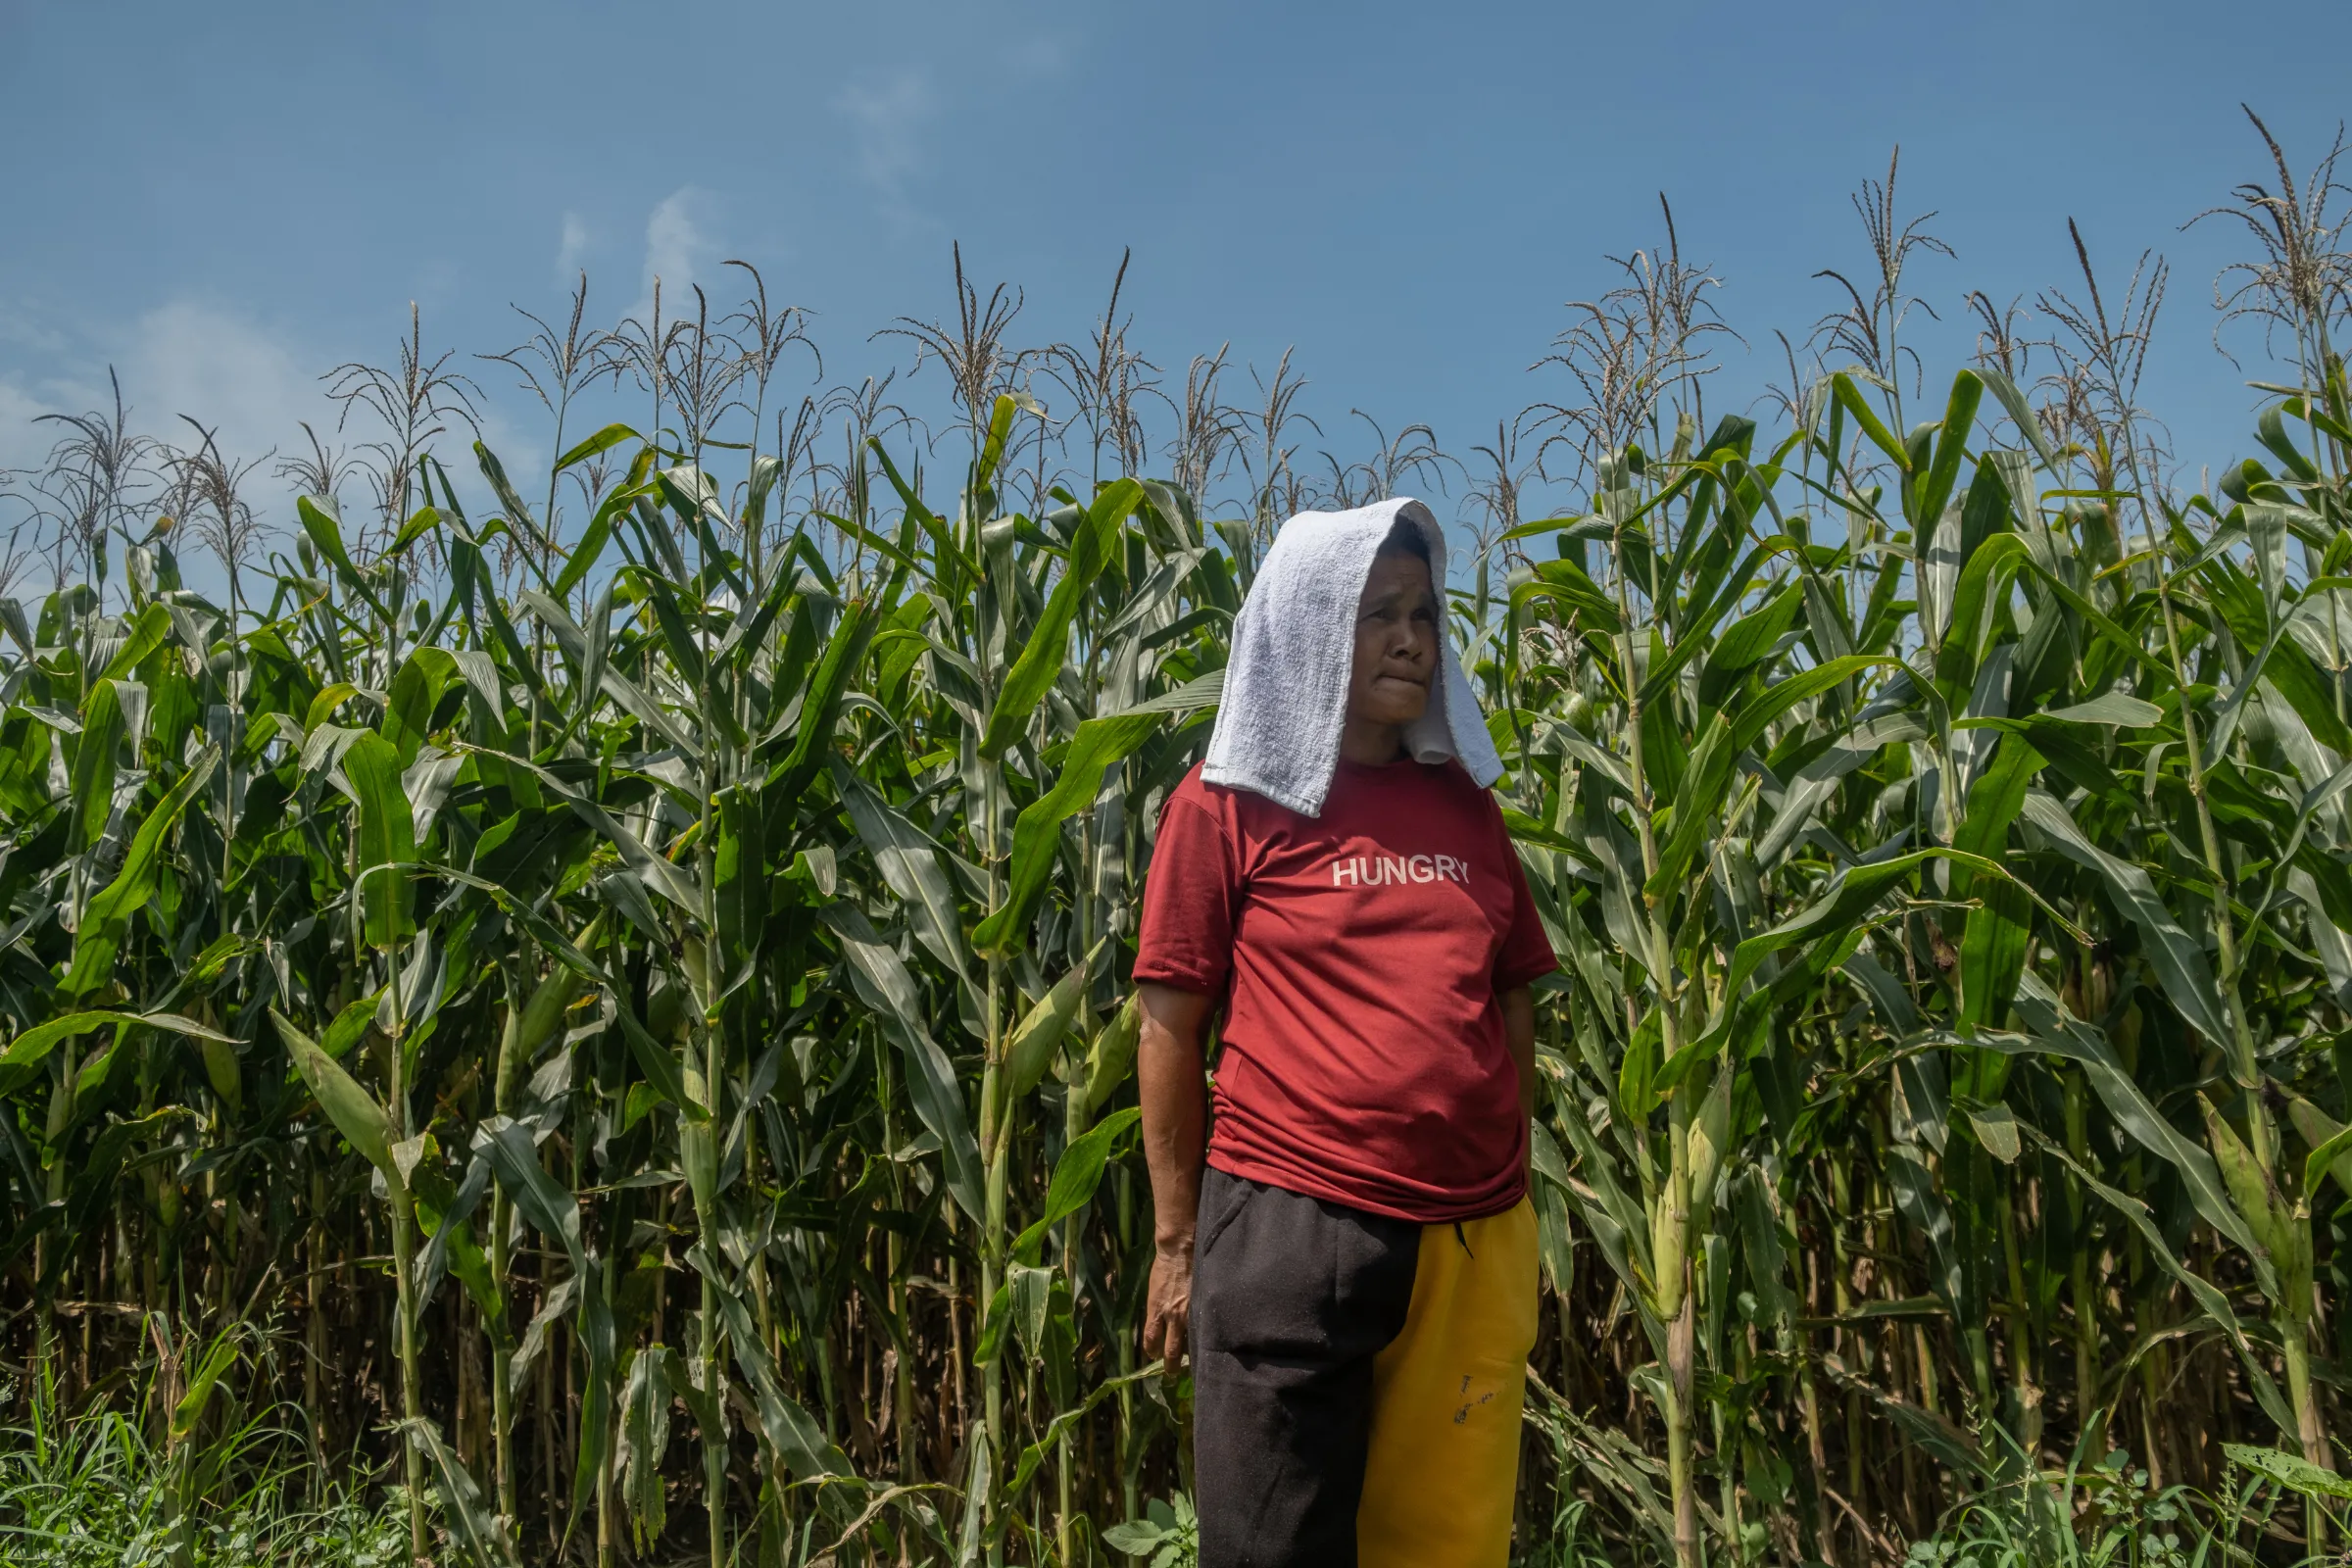 Farmer Merlita Gallardo stands in a field of corn, which she is growing to support her family after their onion crops were destroyed by armyworm, in Bayambang, Philippines, May 14, 2022